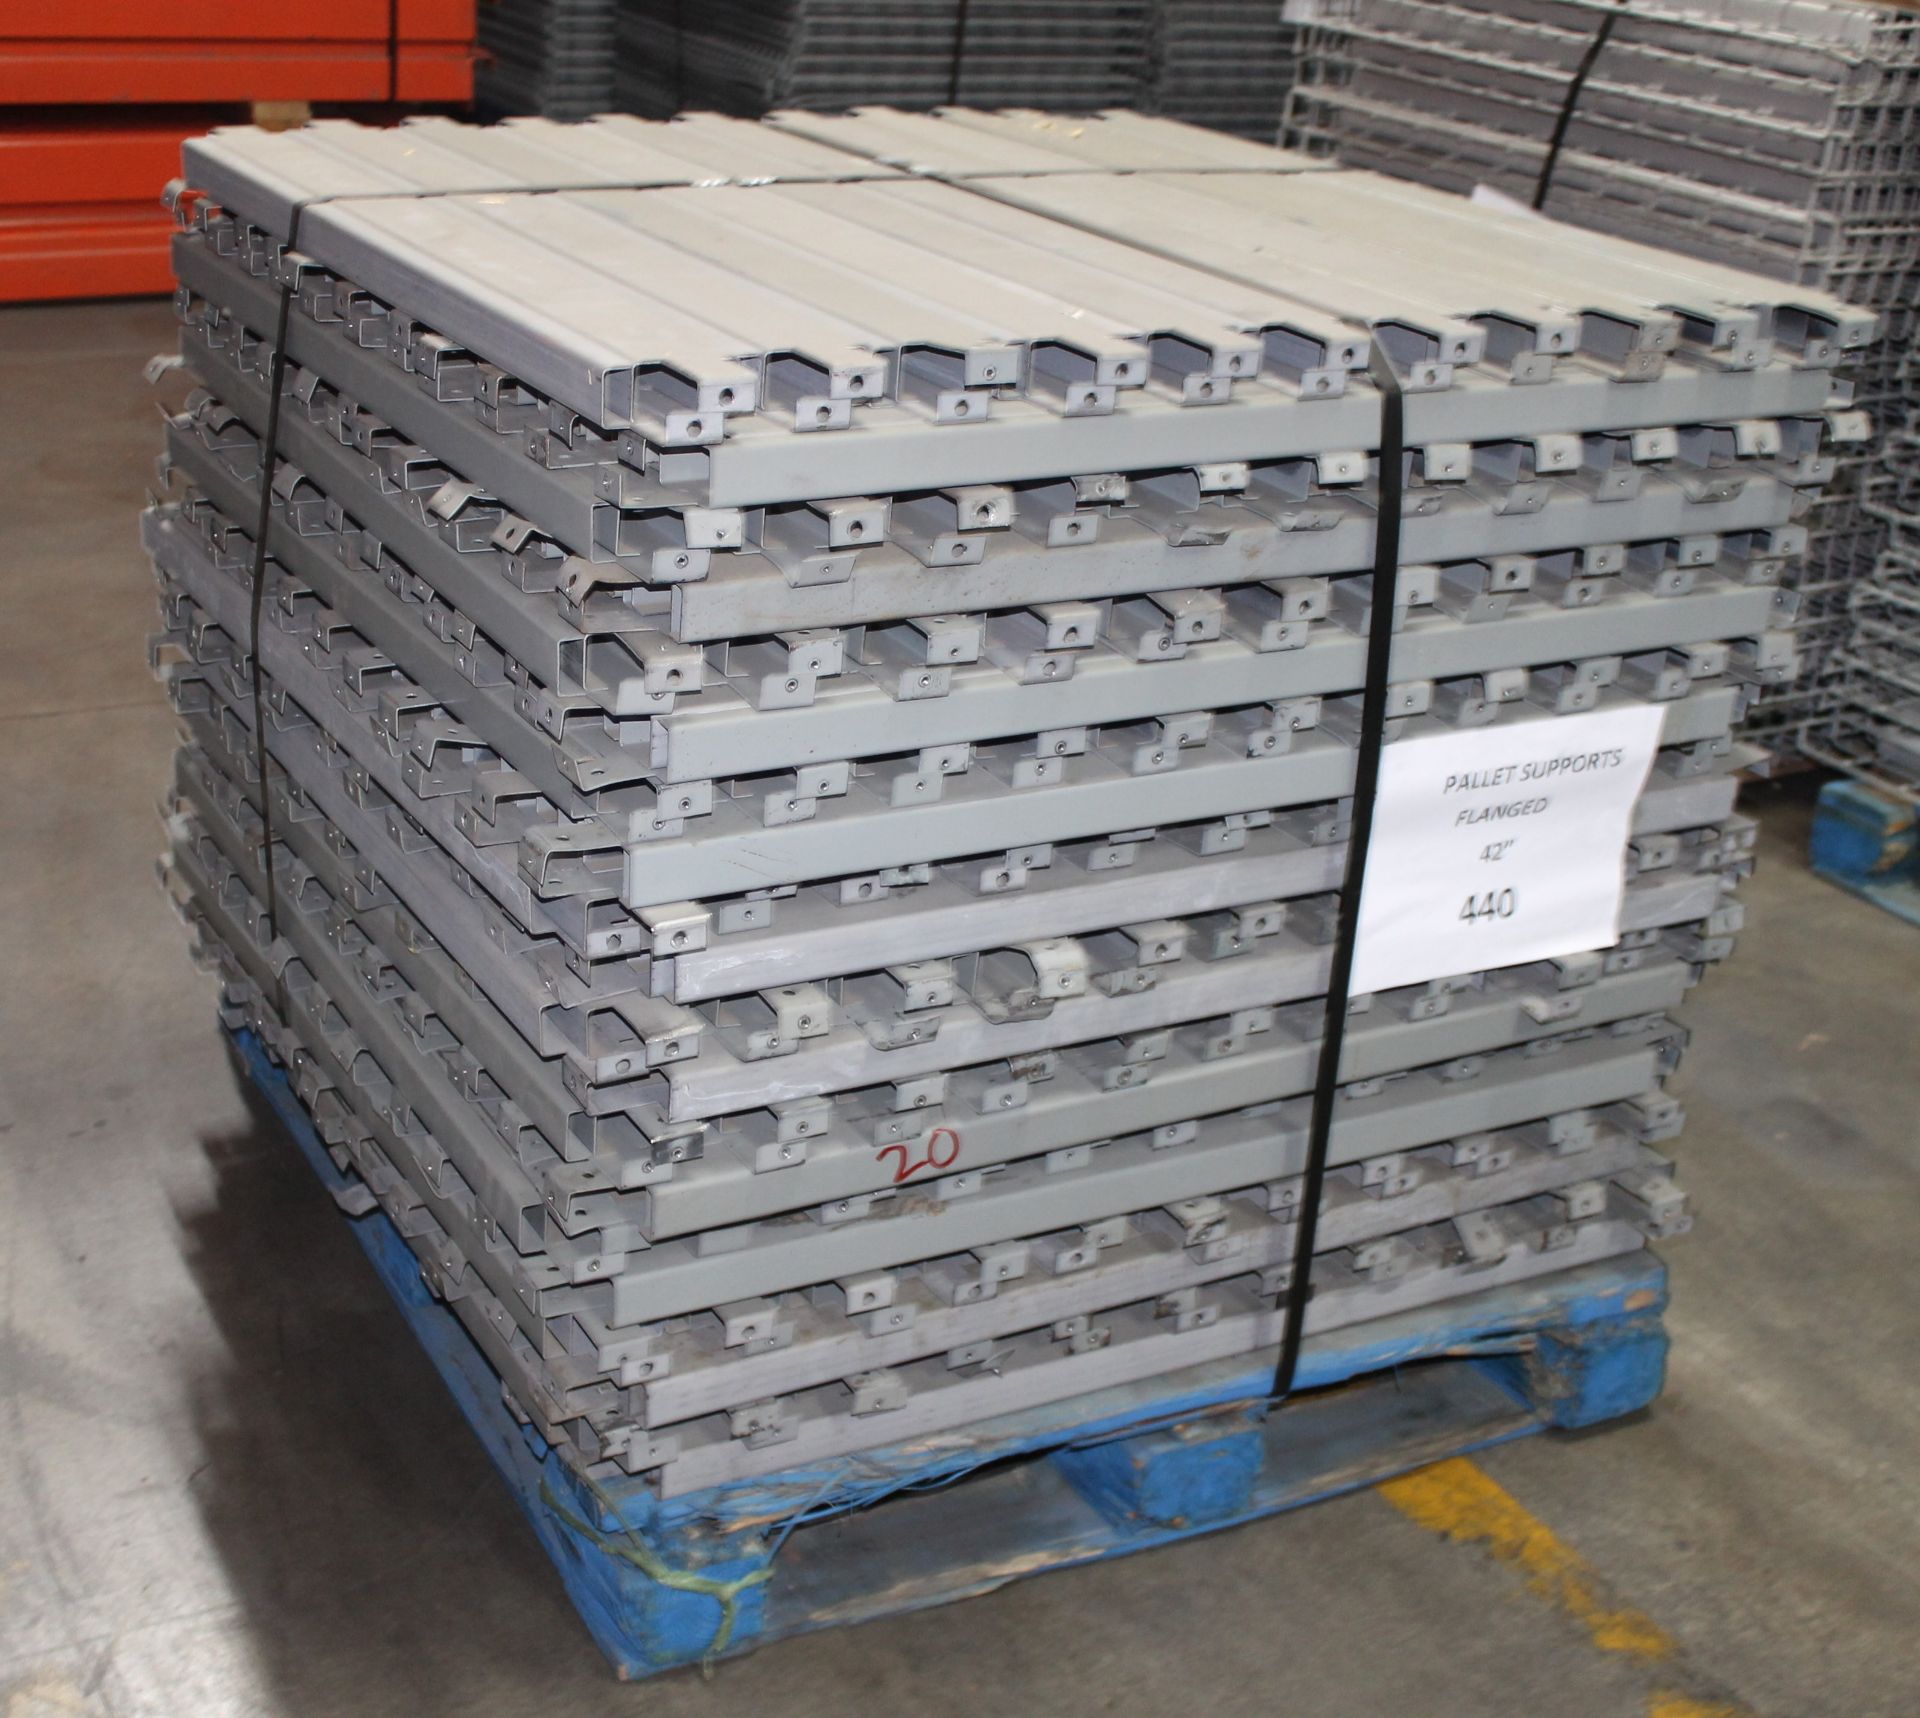 440 PCS OF 42" FLANGED METAL PALLET SUPPORTS FOR 42" DEEP UPRIGHT. - Image 3 of 3